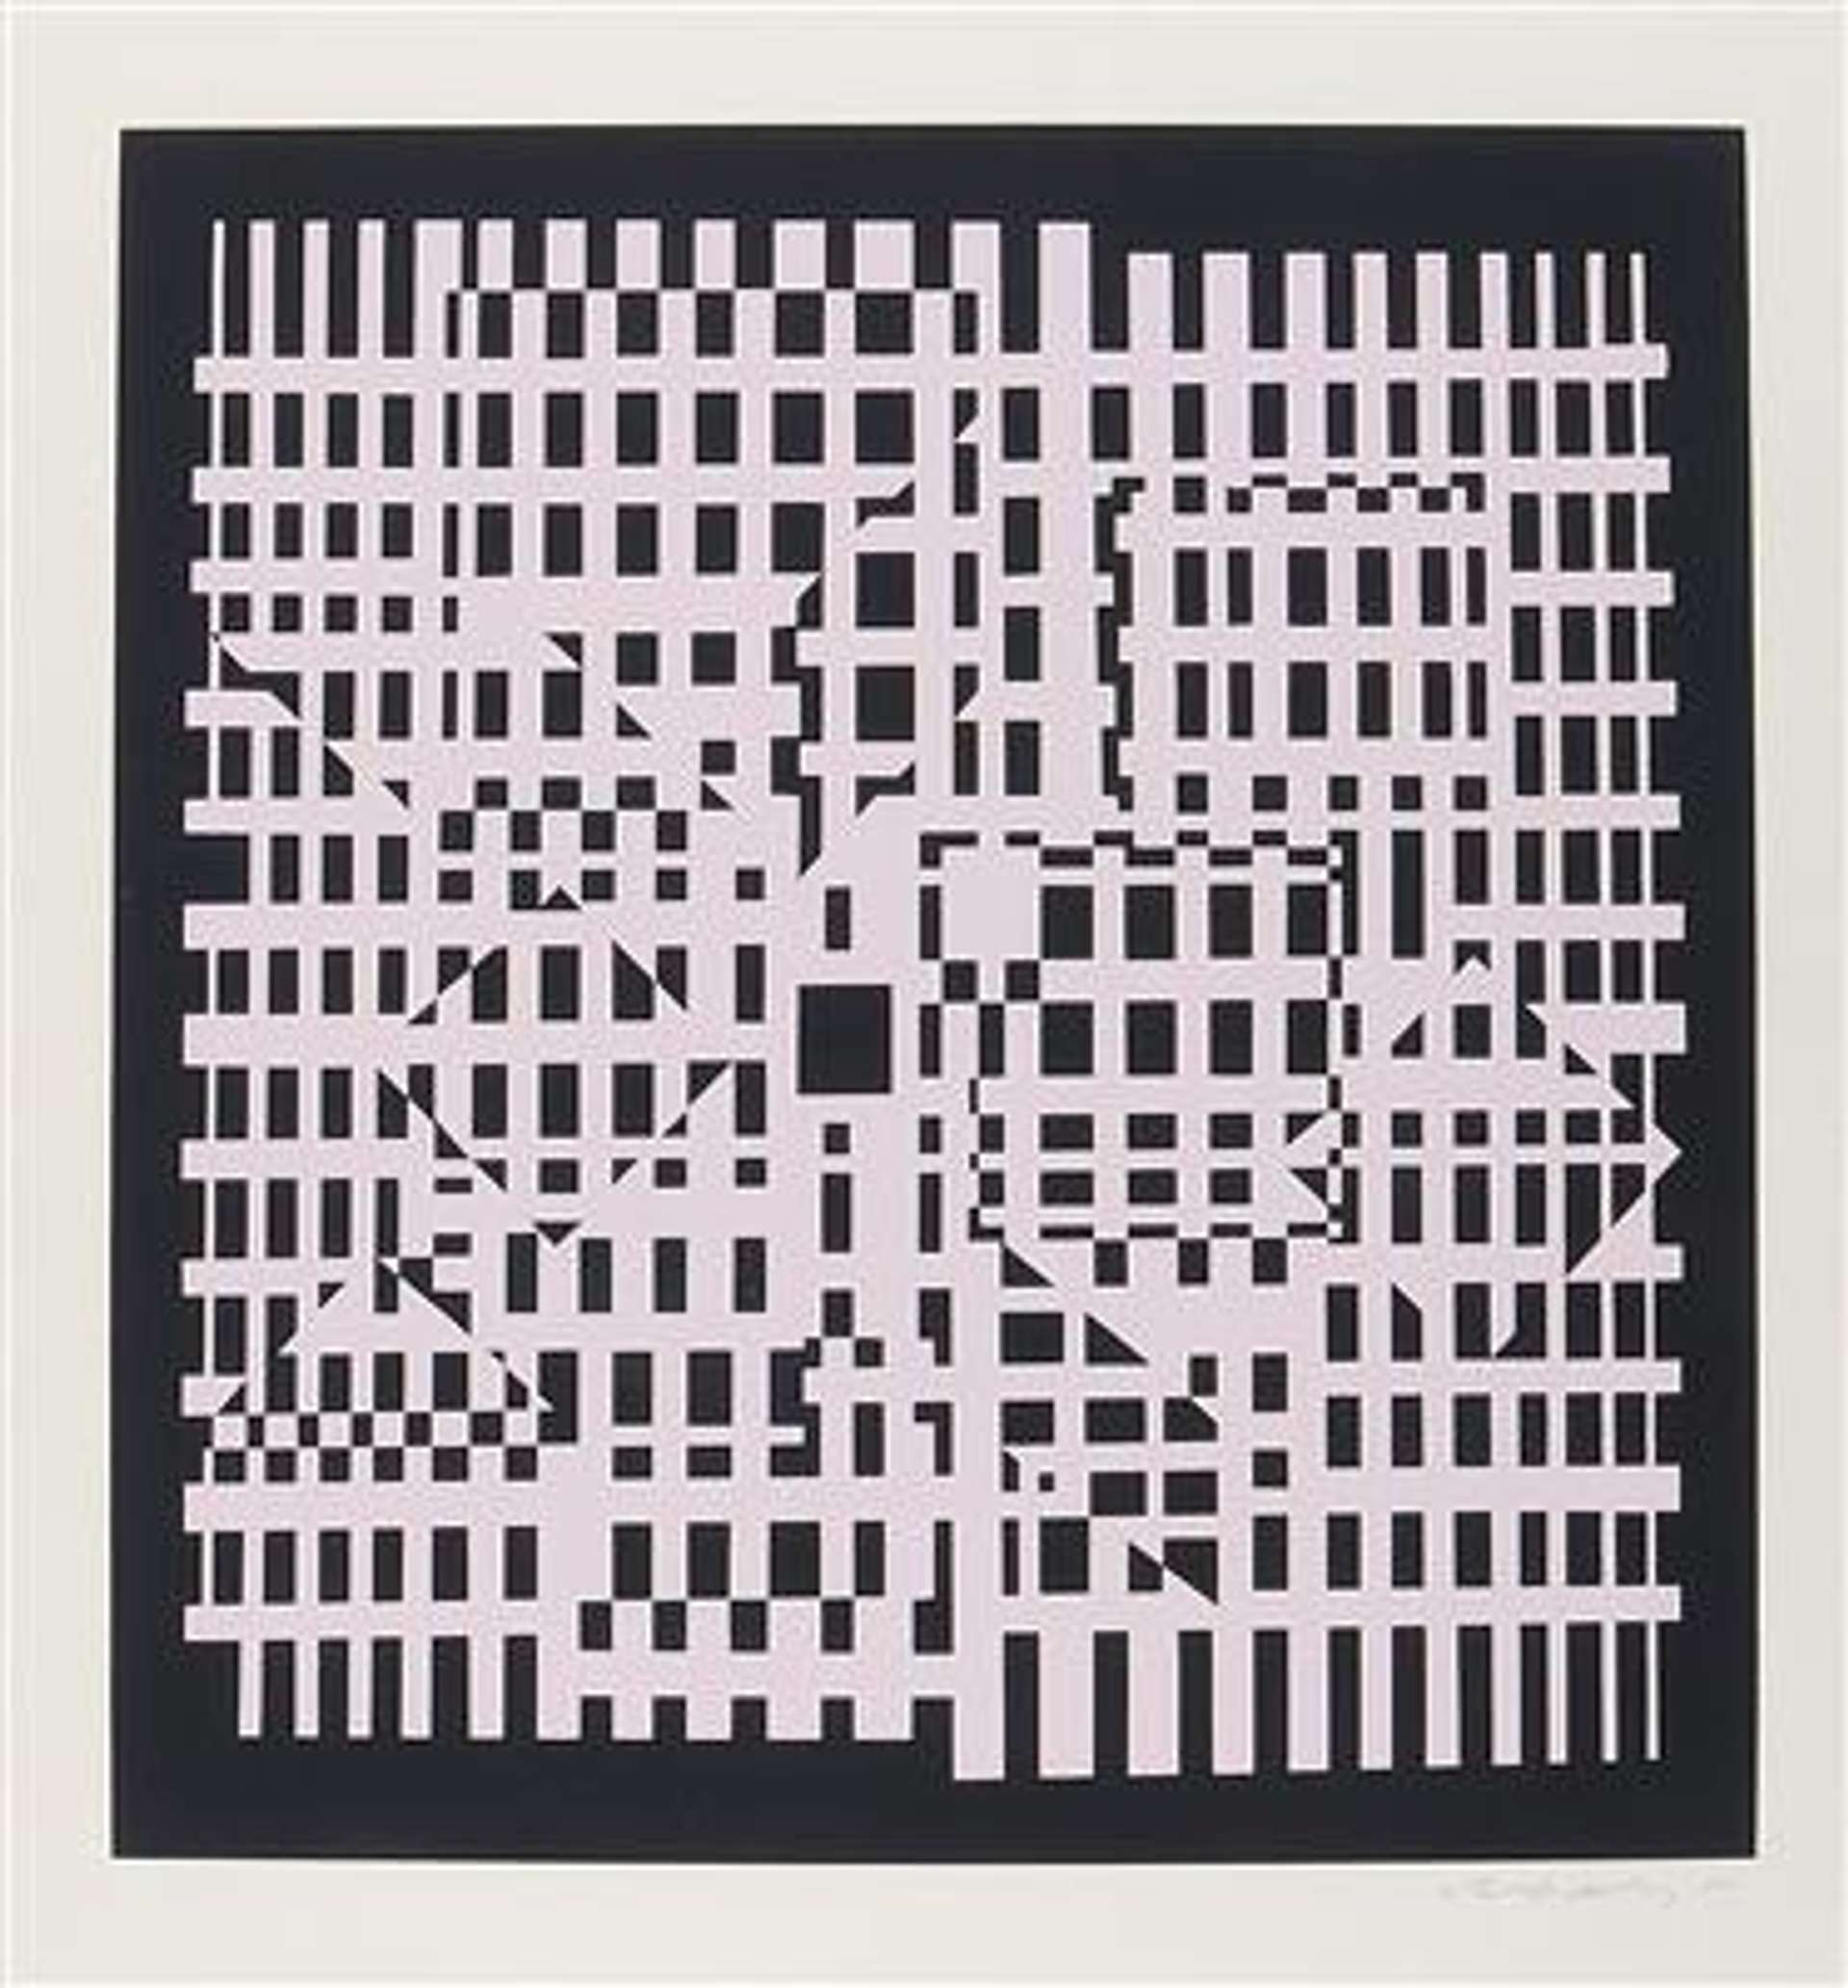 Caracas by Victor Vasarely (1955). The print is a black and white, irregular grid, which produces the optical illusion of shapes hidden within it.